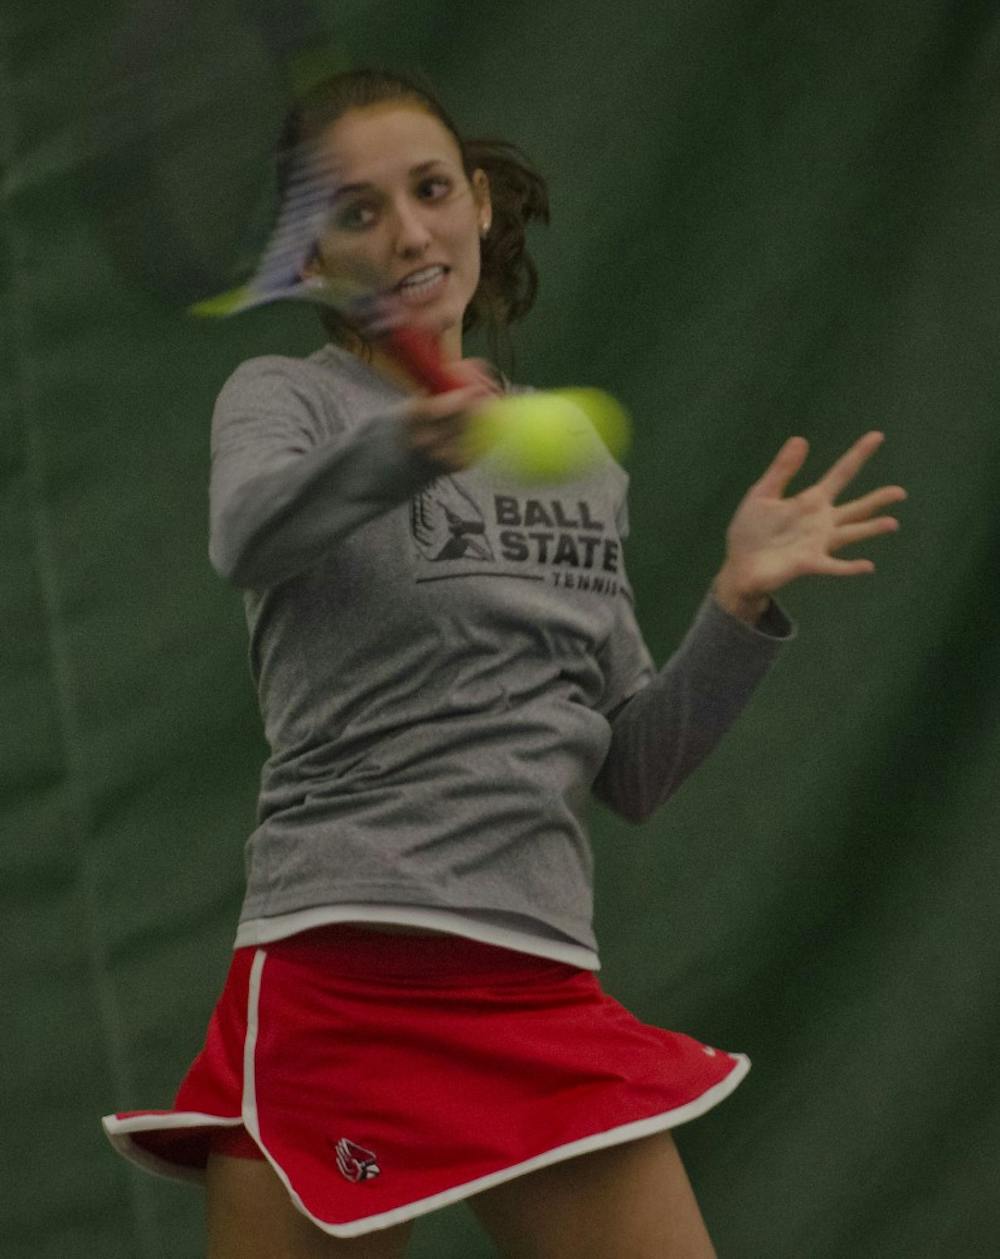 Ball State sophomore Courtney Earnest strikes a forehand against Valparaiso in the No. 2 singles match Jan. 17 at the Northwest YMCA in Muncie. DN PHOTO MARCEY BURTON